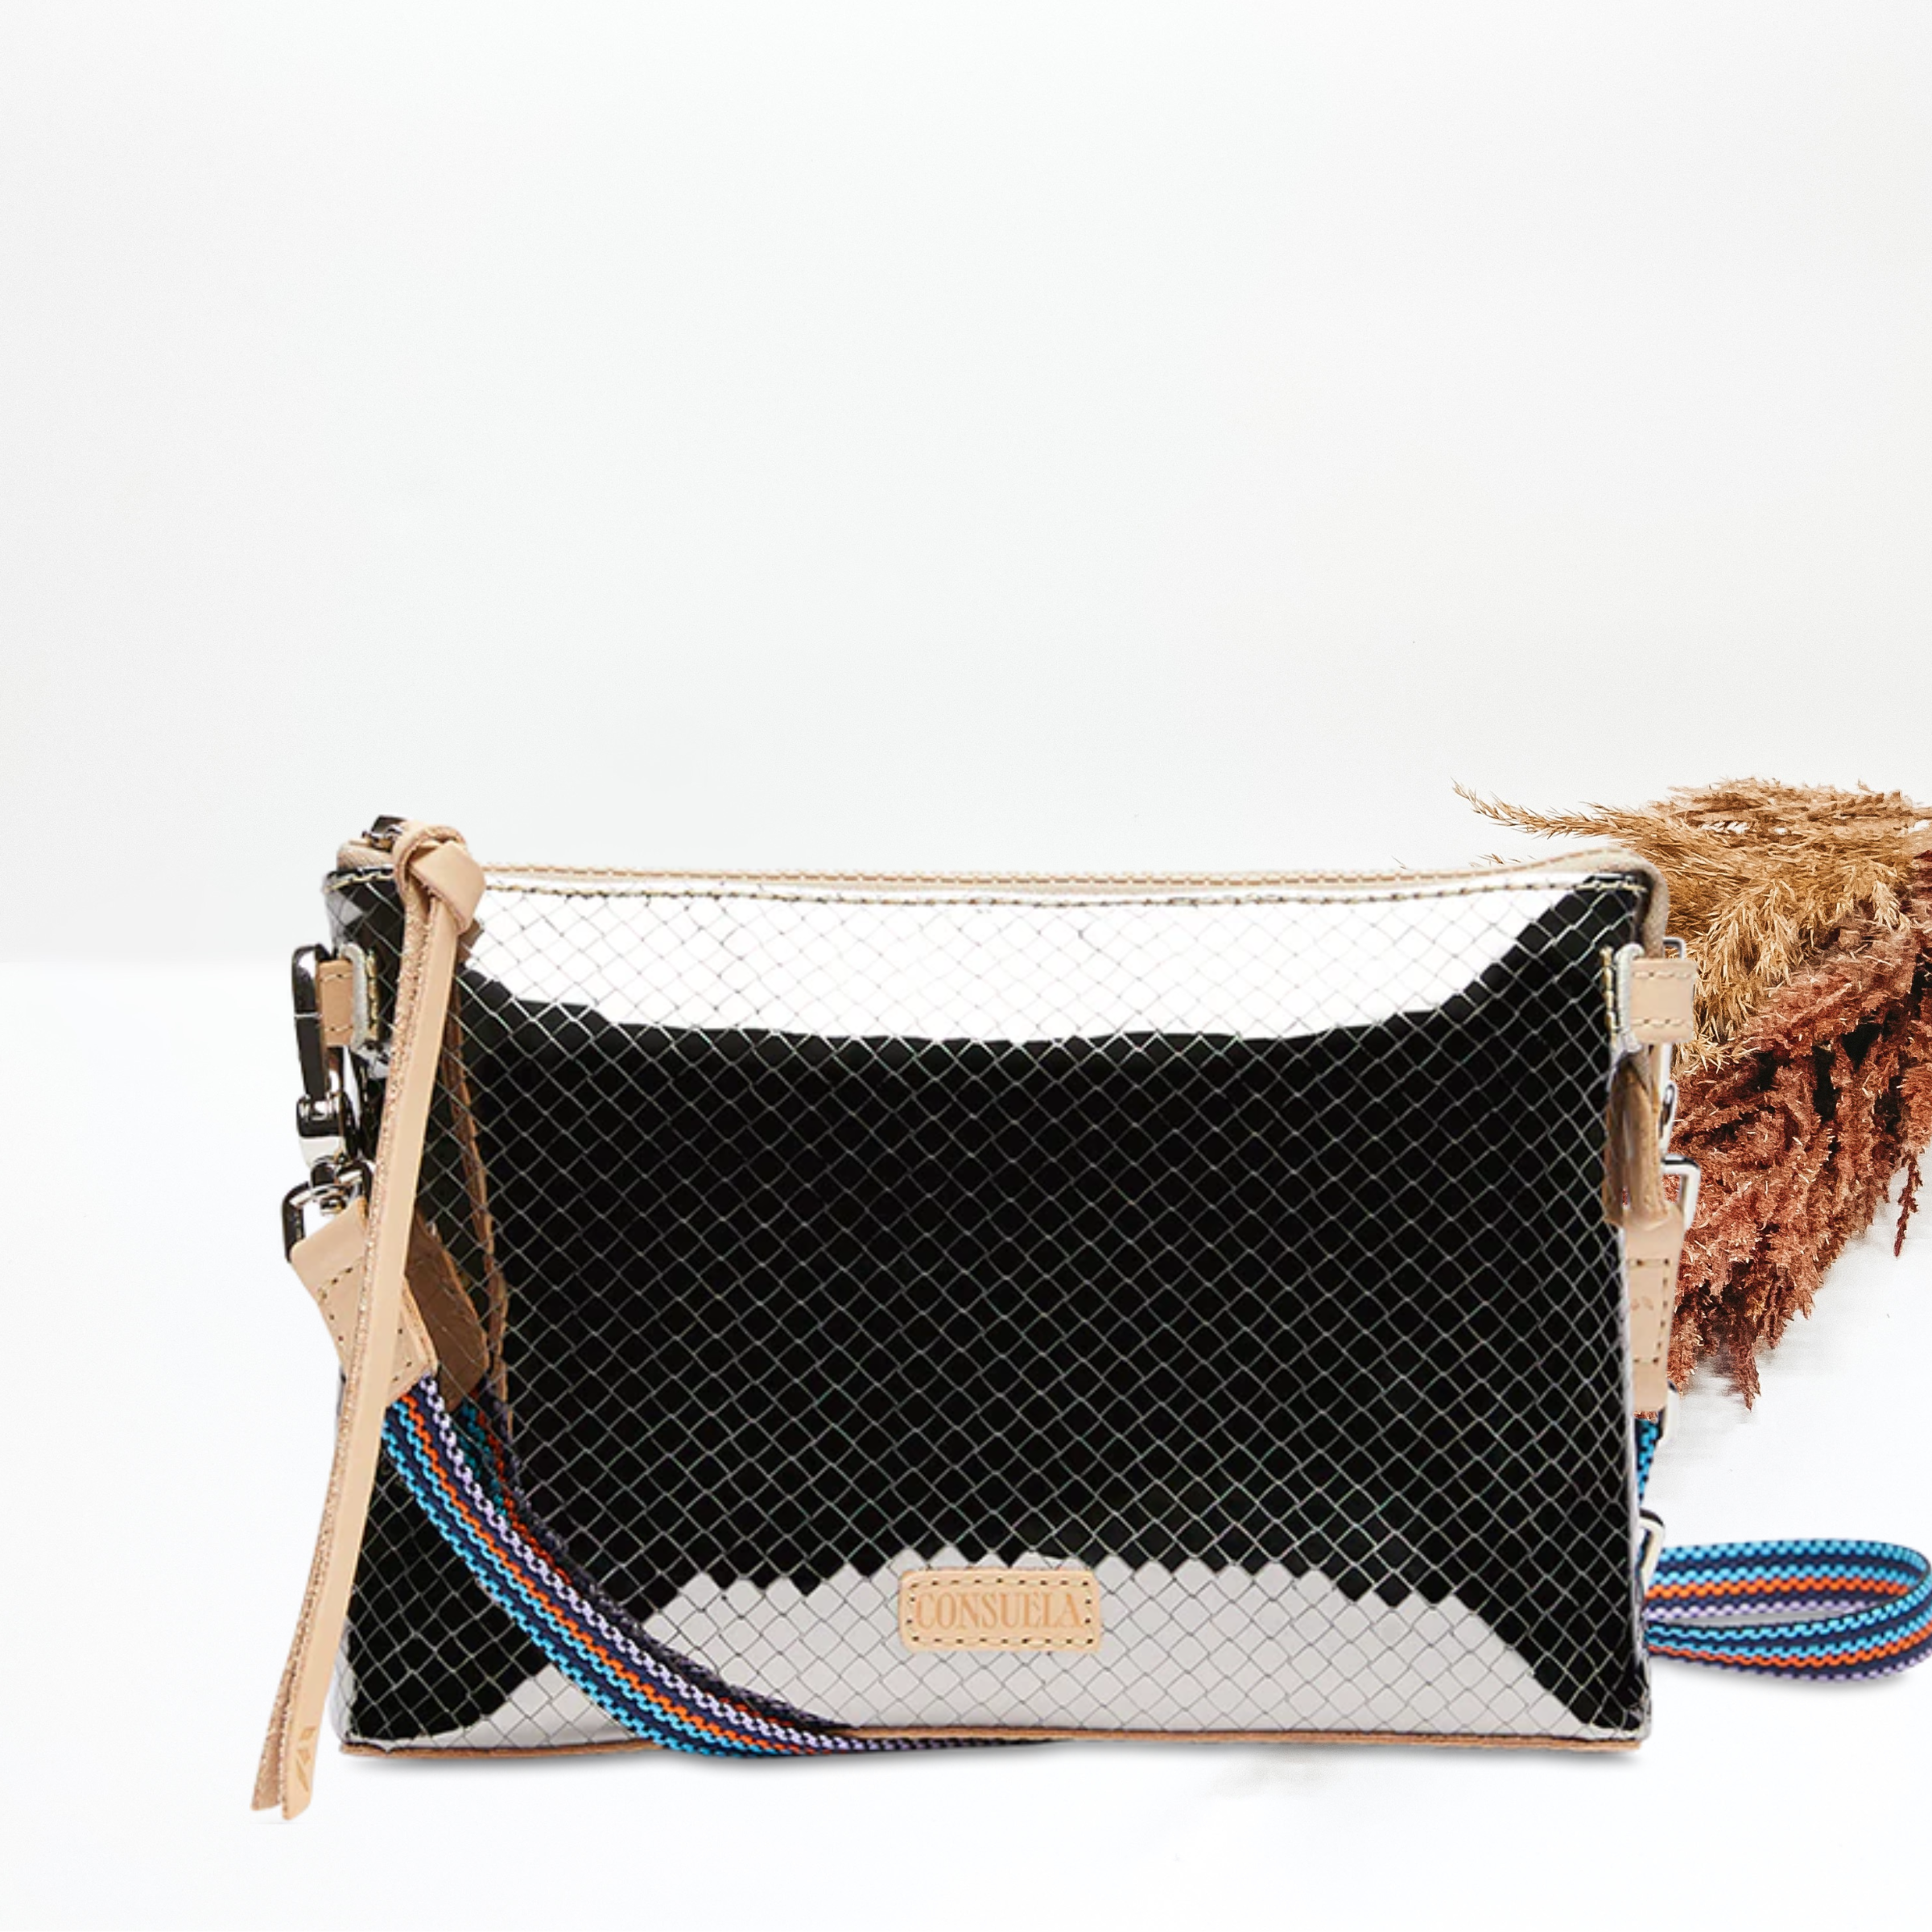 Pictured is a rectangle crossbody purse. This purse is silver with a stitched print design. This purse is pictured on a white background with pompous grass on the right side of the picture.